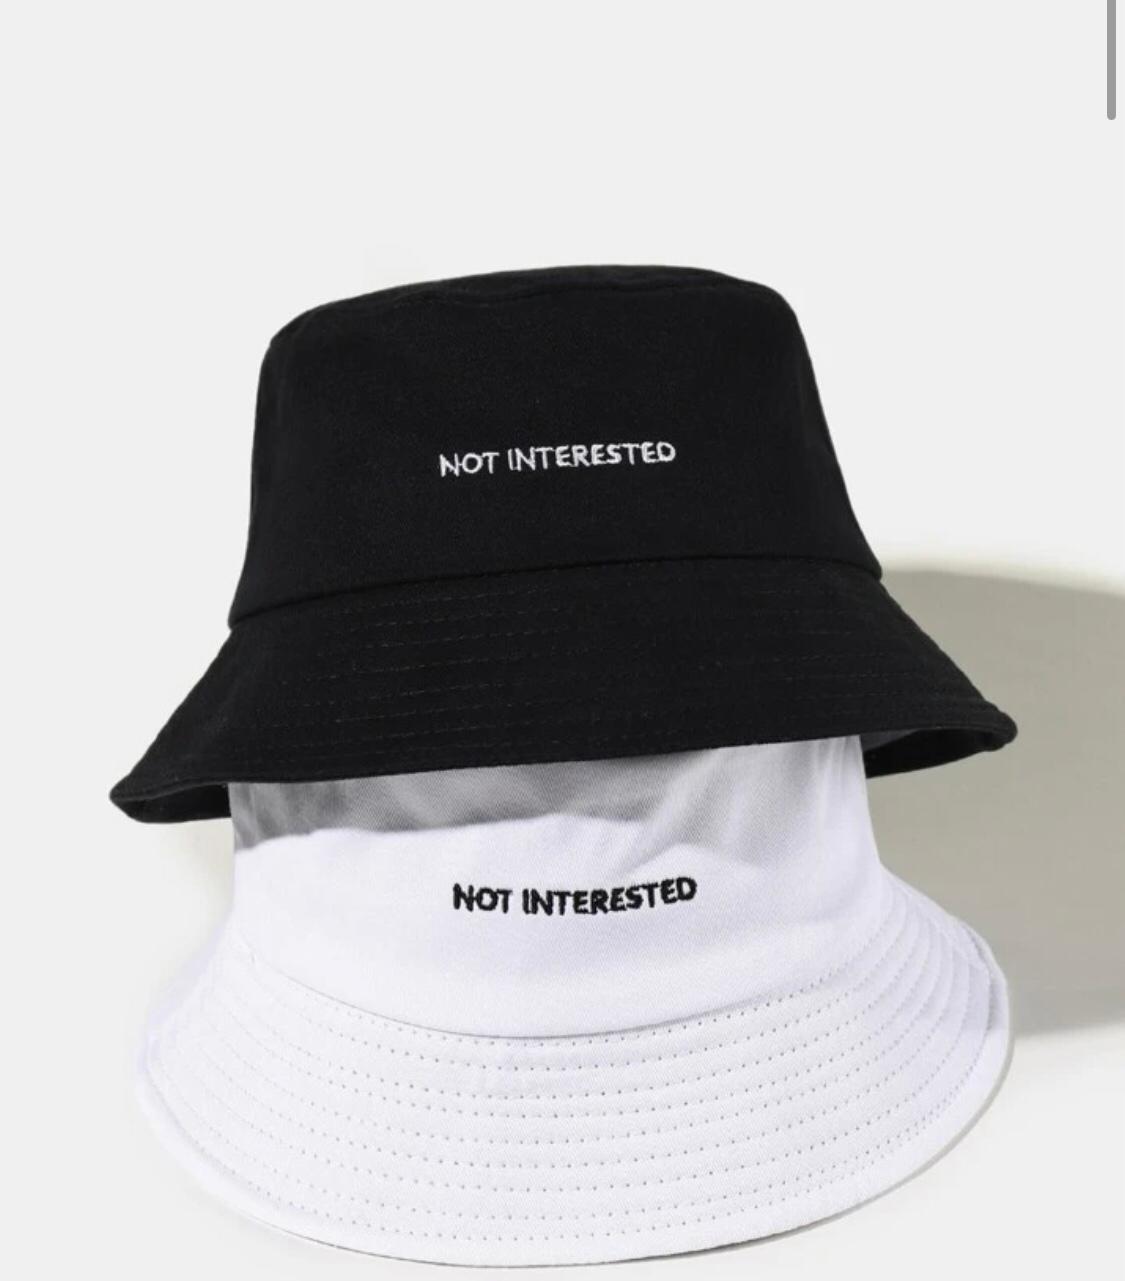 White "Not Interested" bucket hat